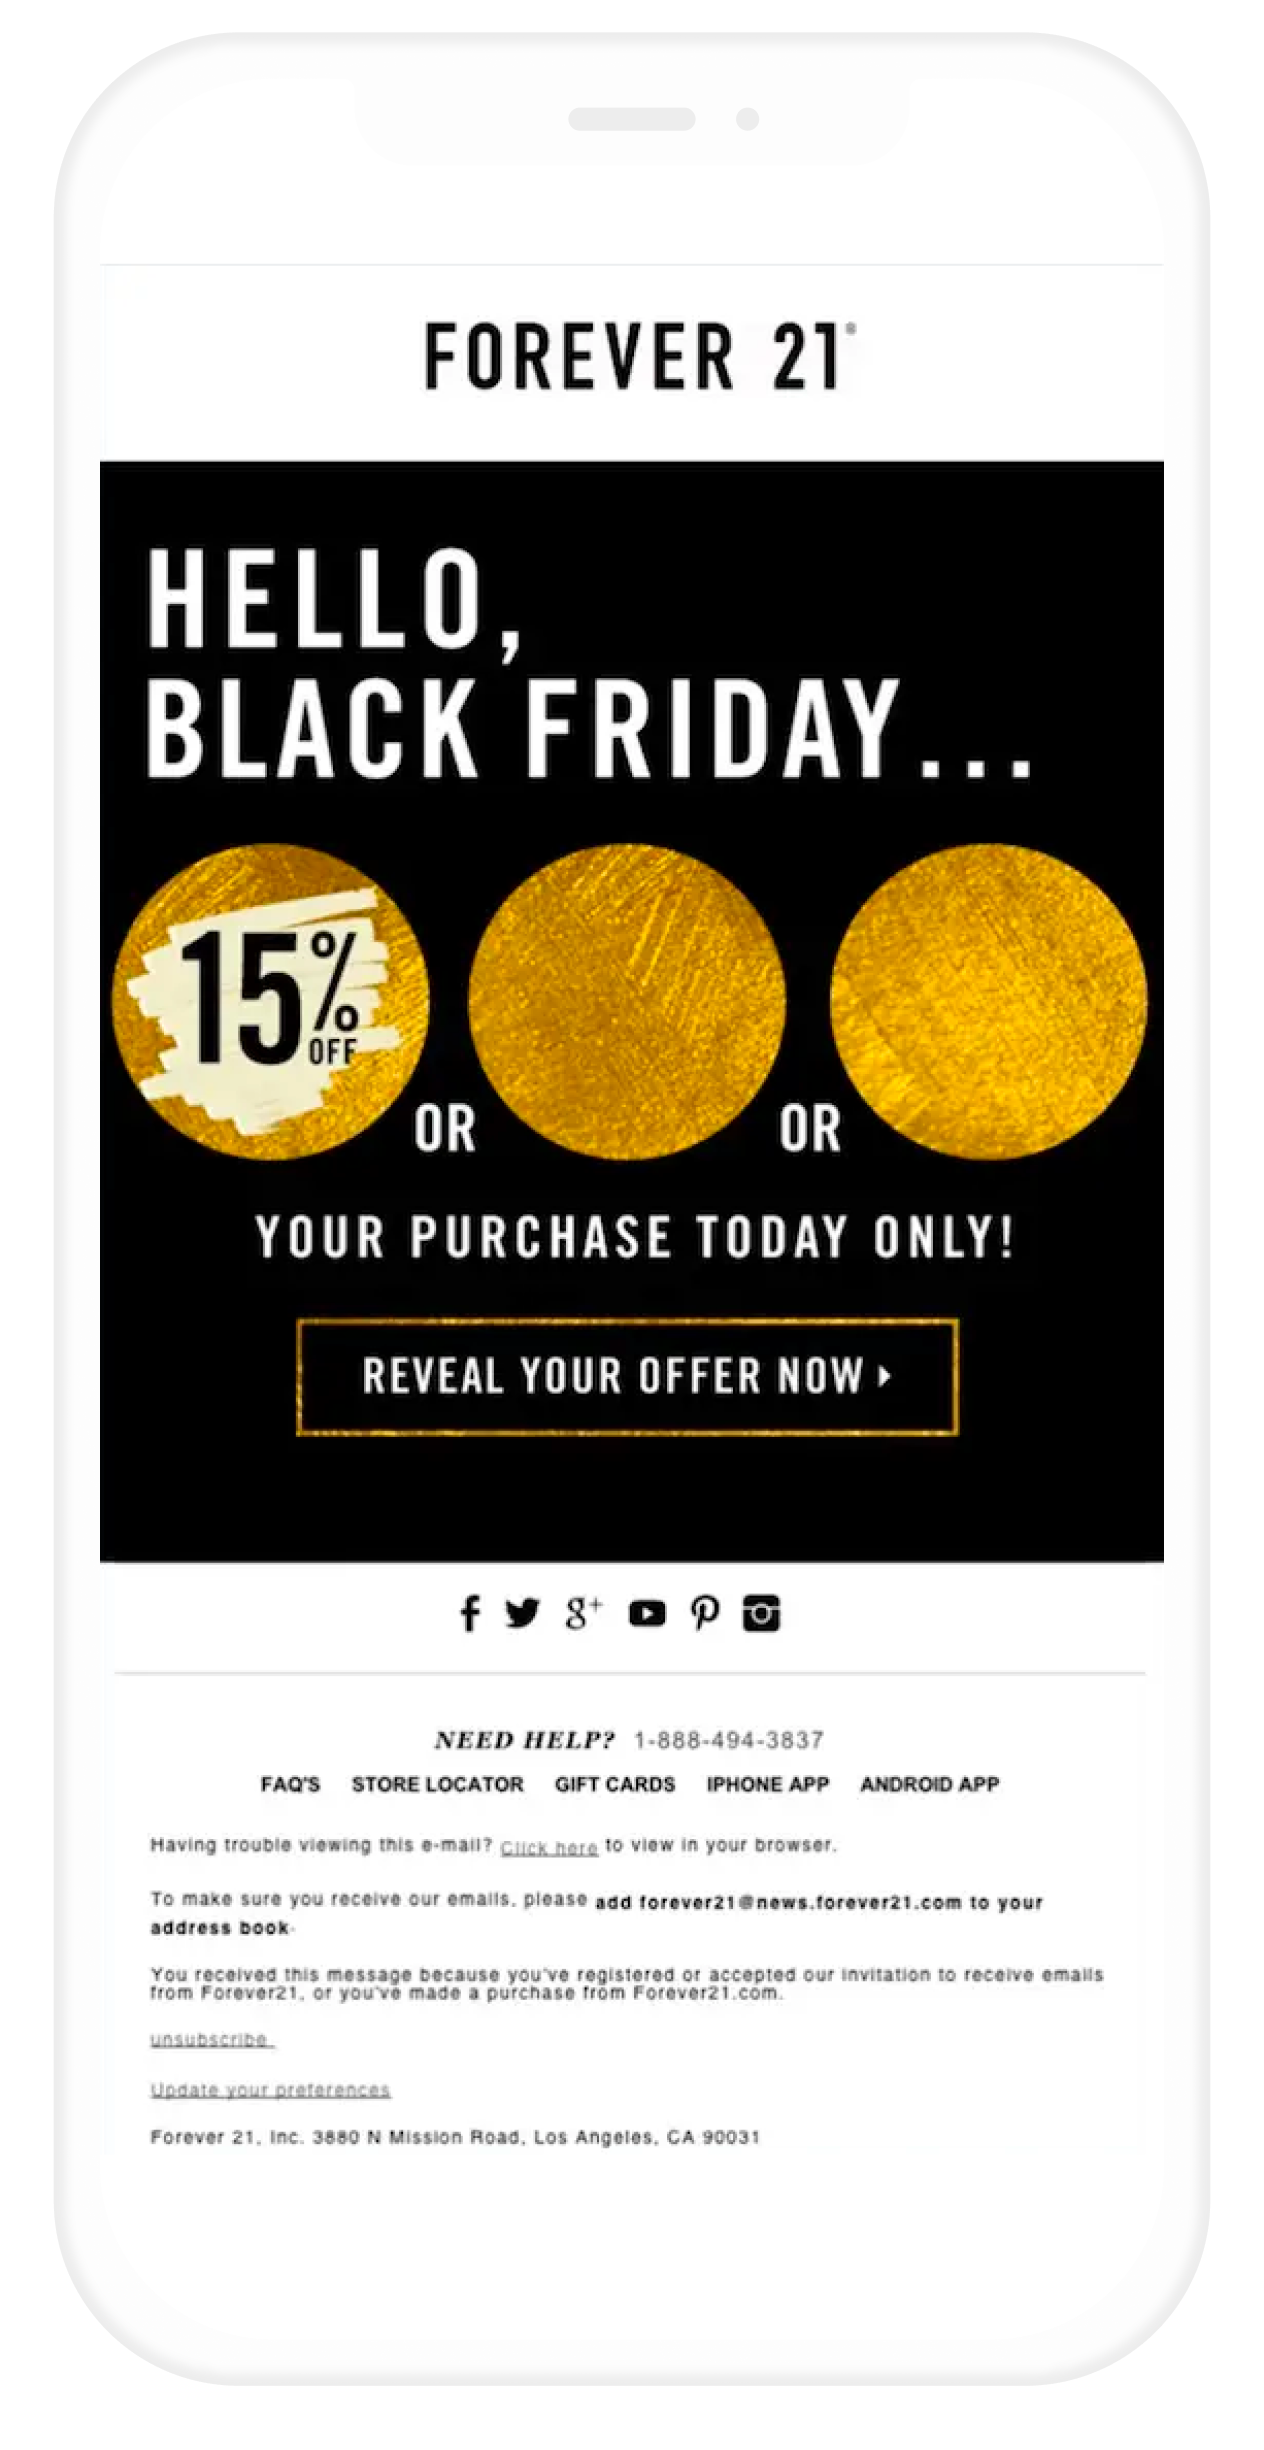 Email from Forever 21 with a scratch card for their Black Friday deals.